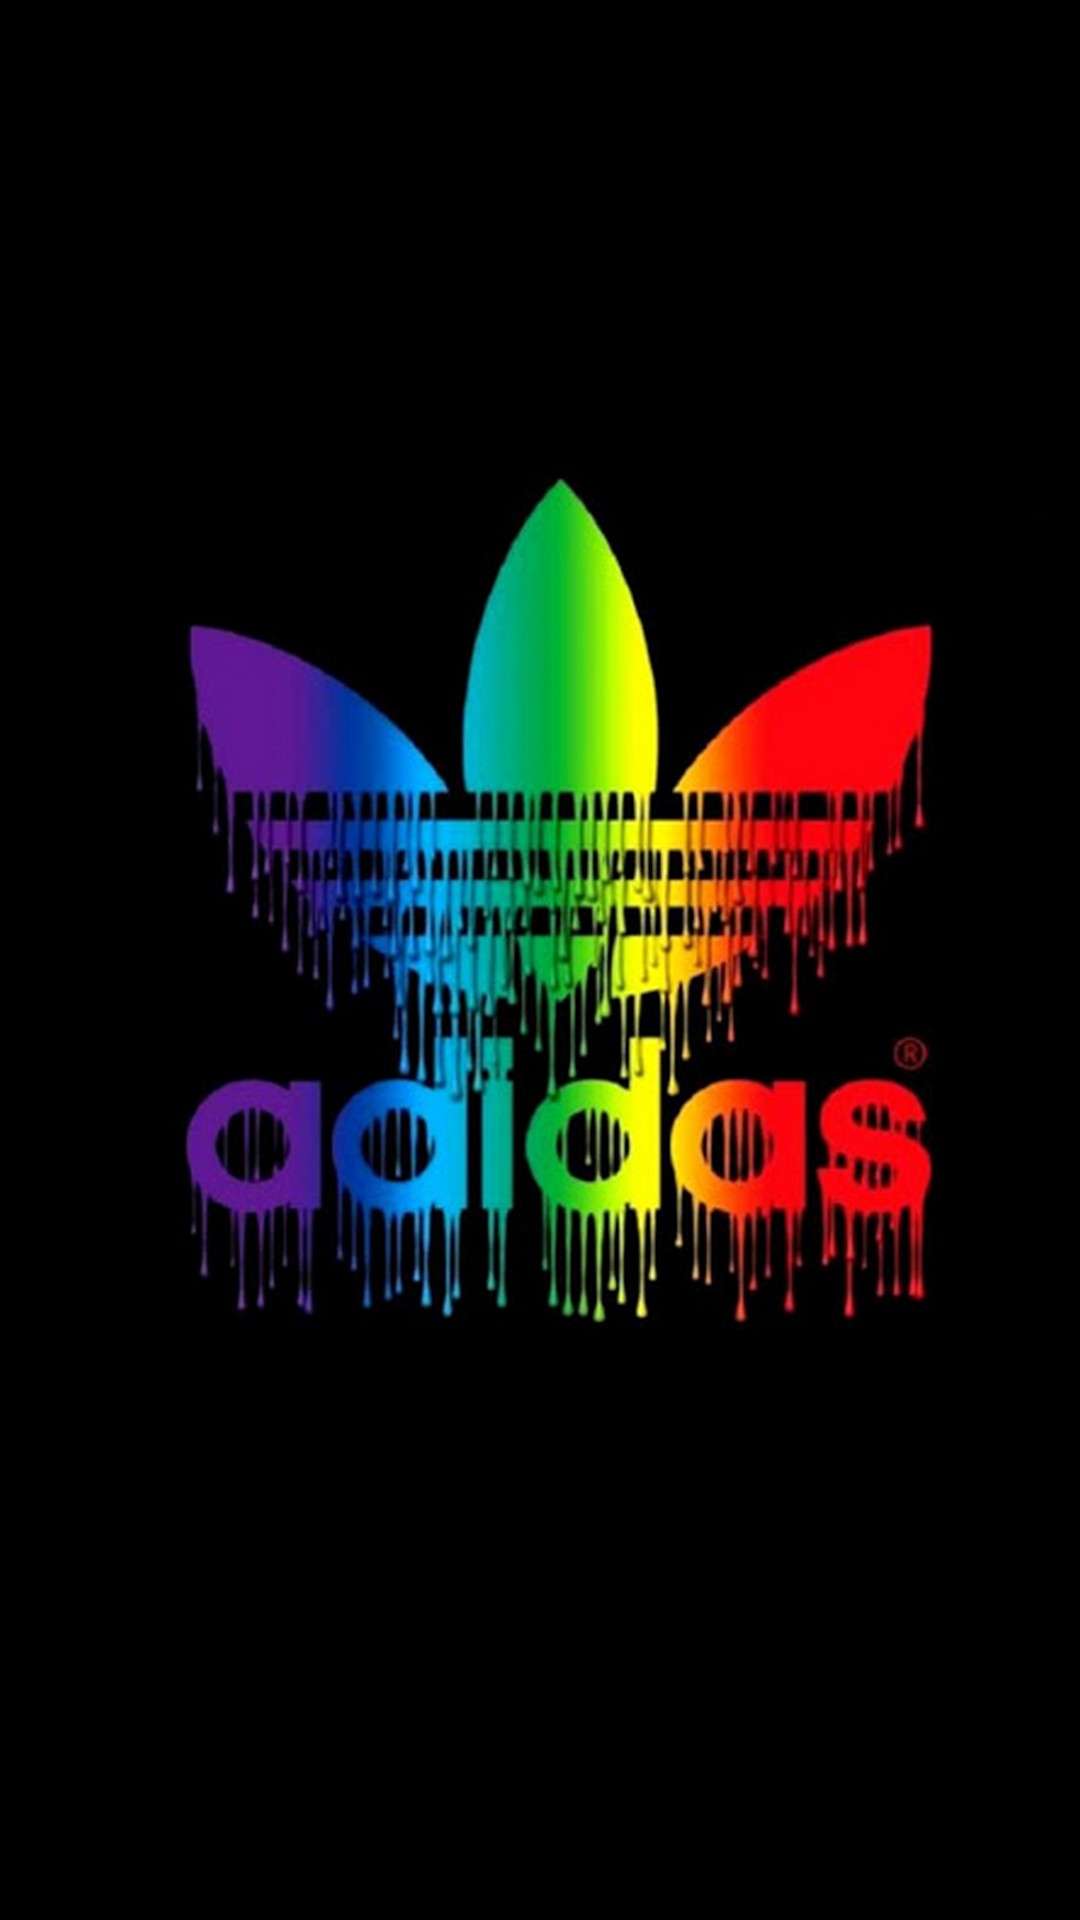 Adidas HD Wallpapers For Android with high-resolution 1080x1920 pixel. You can use this wallpaper for your Android backgrounds, Tablet, Samsung Screensavers, Mobile Phone Lock Screen and another Smartphones device